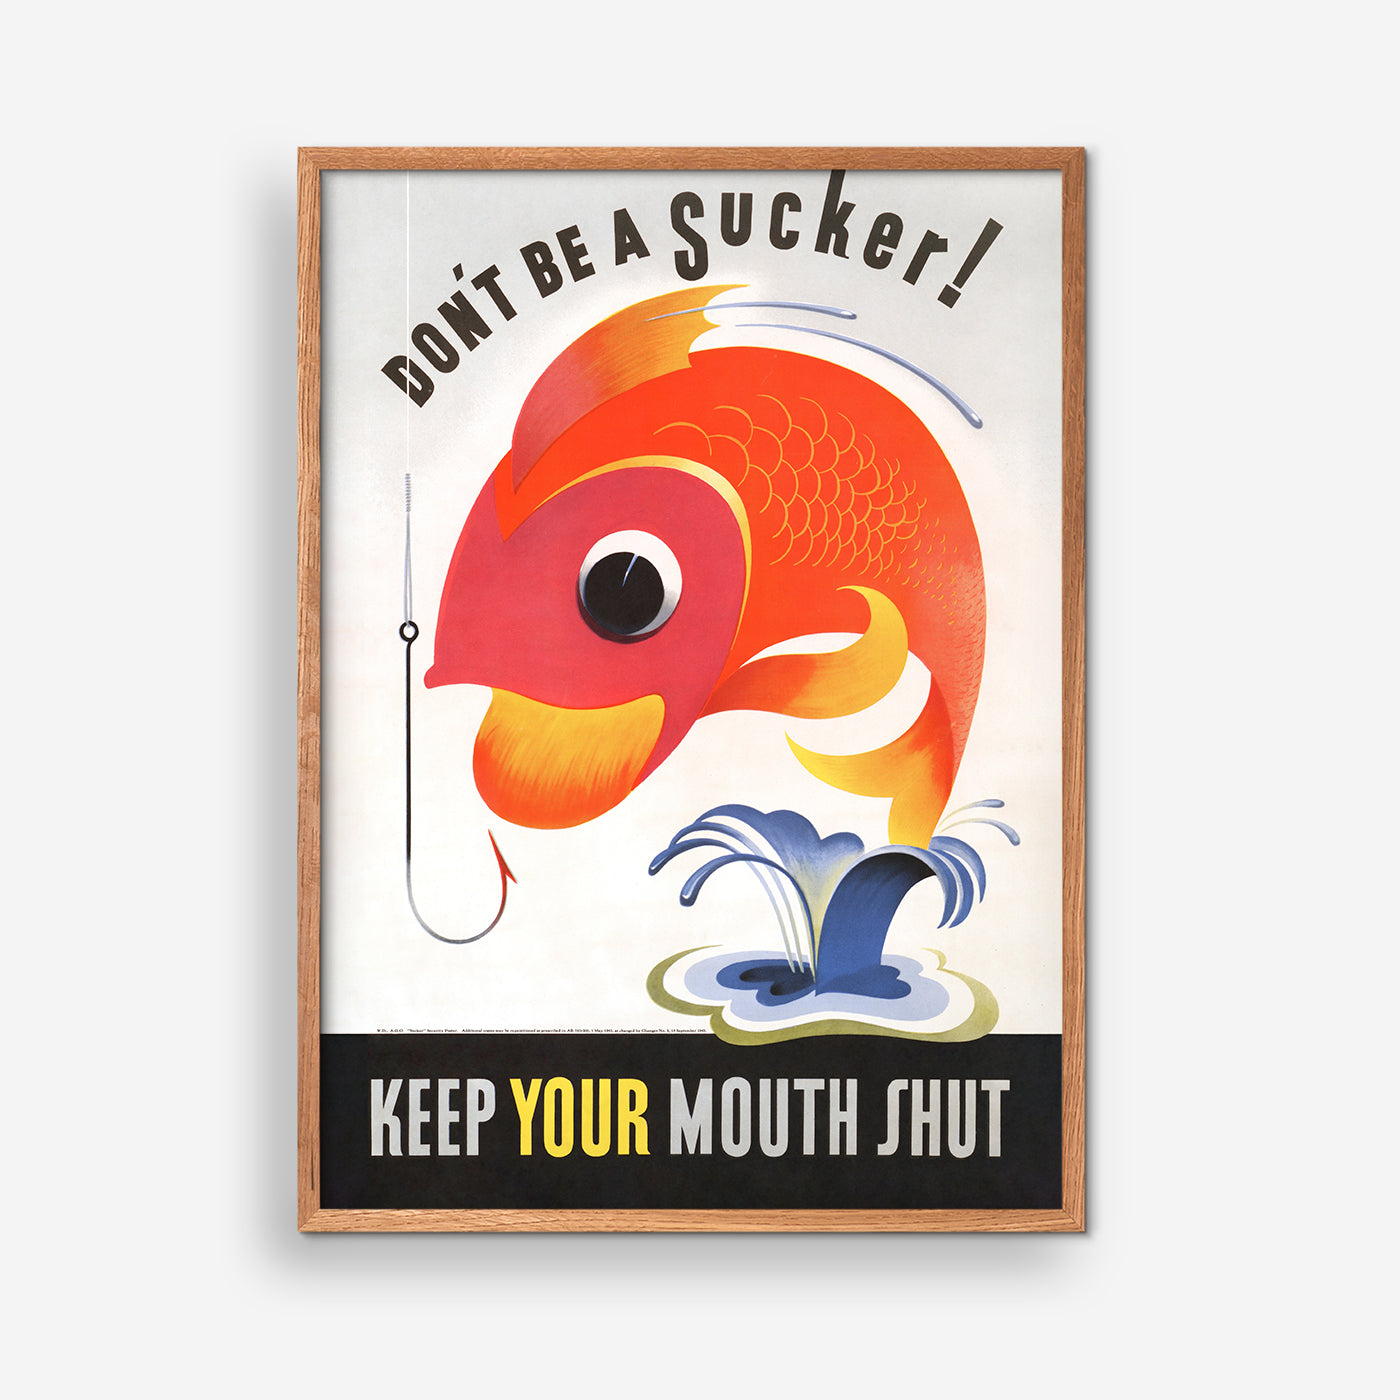 Don't be a sucker! Keep your mouth shut, 1944 - Library of Congress